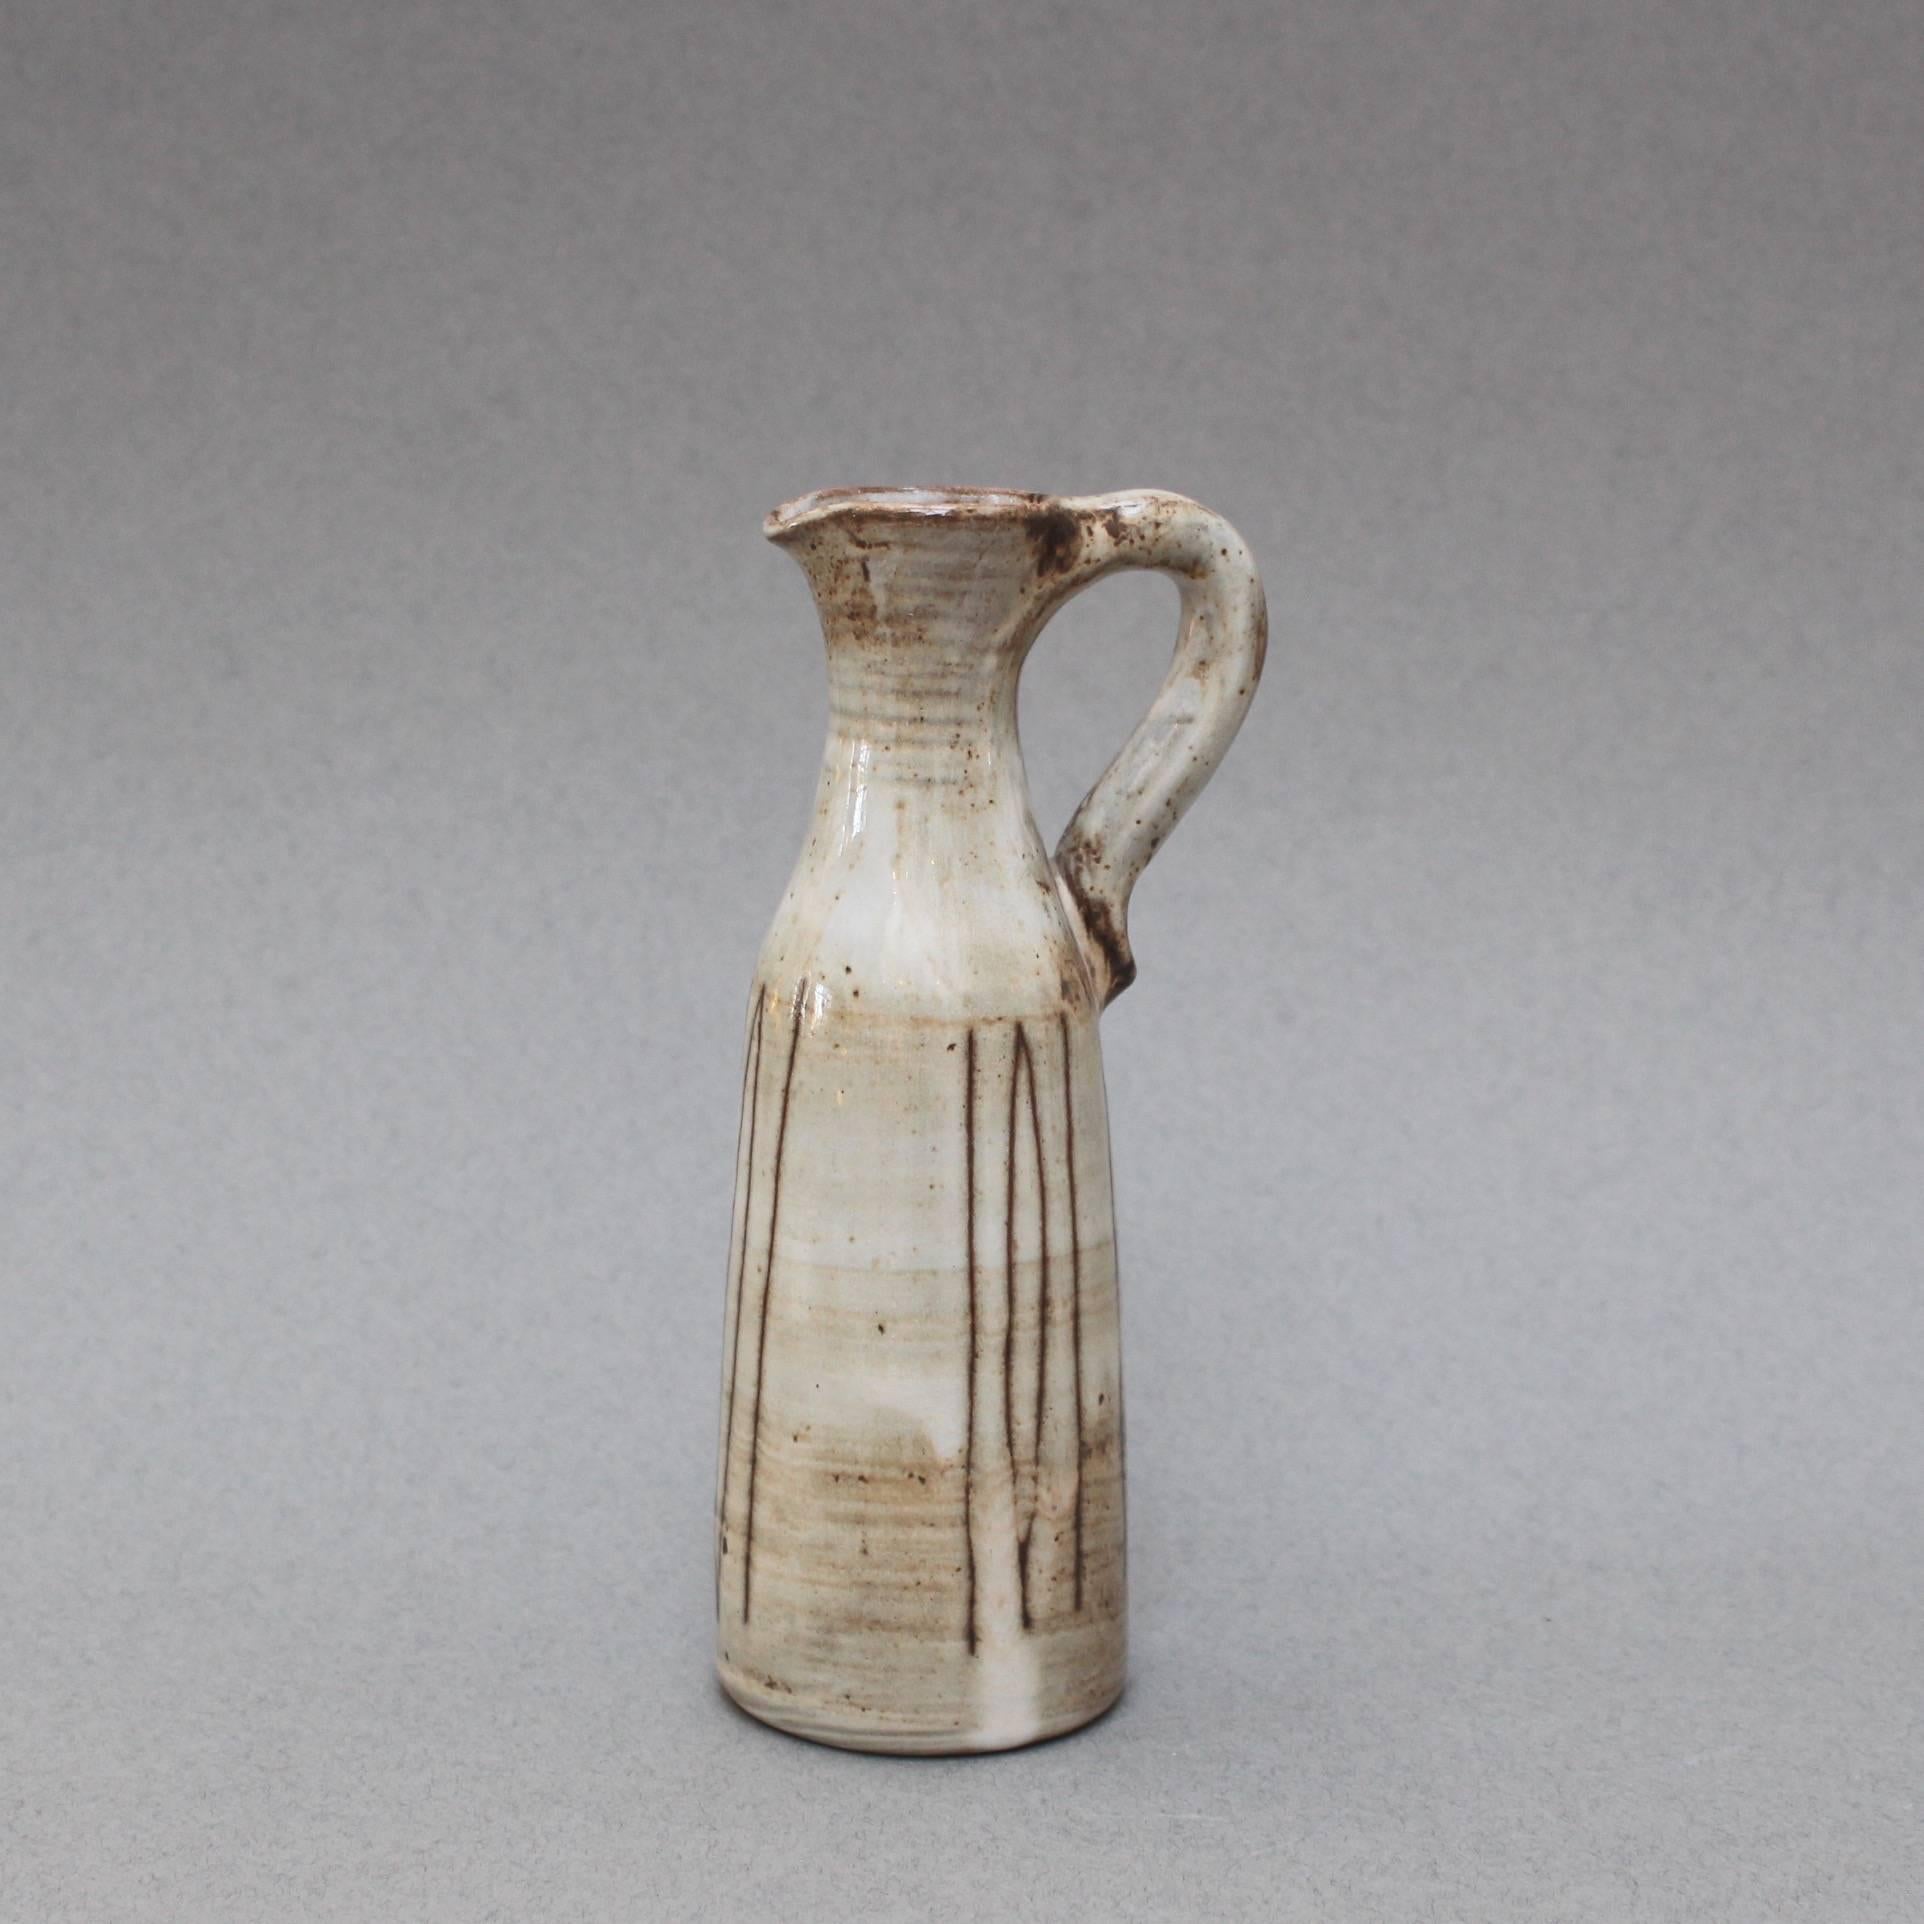 Small ceramic jug with handle by Jacques Pouchain, (circa 1960s). This midcentury ceramic jug is elegantly glazed in light beige with a contemporary brown motif surround. Engraved: 